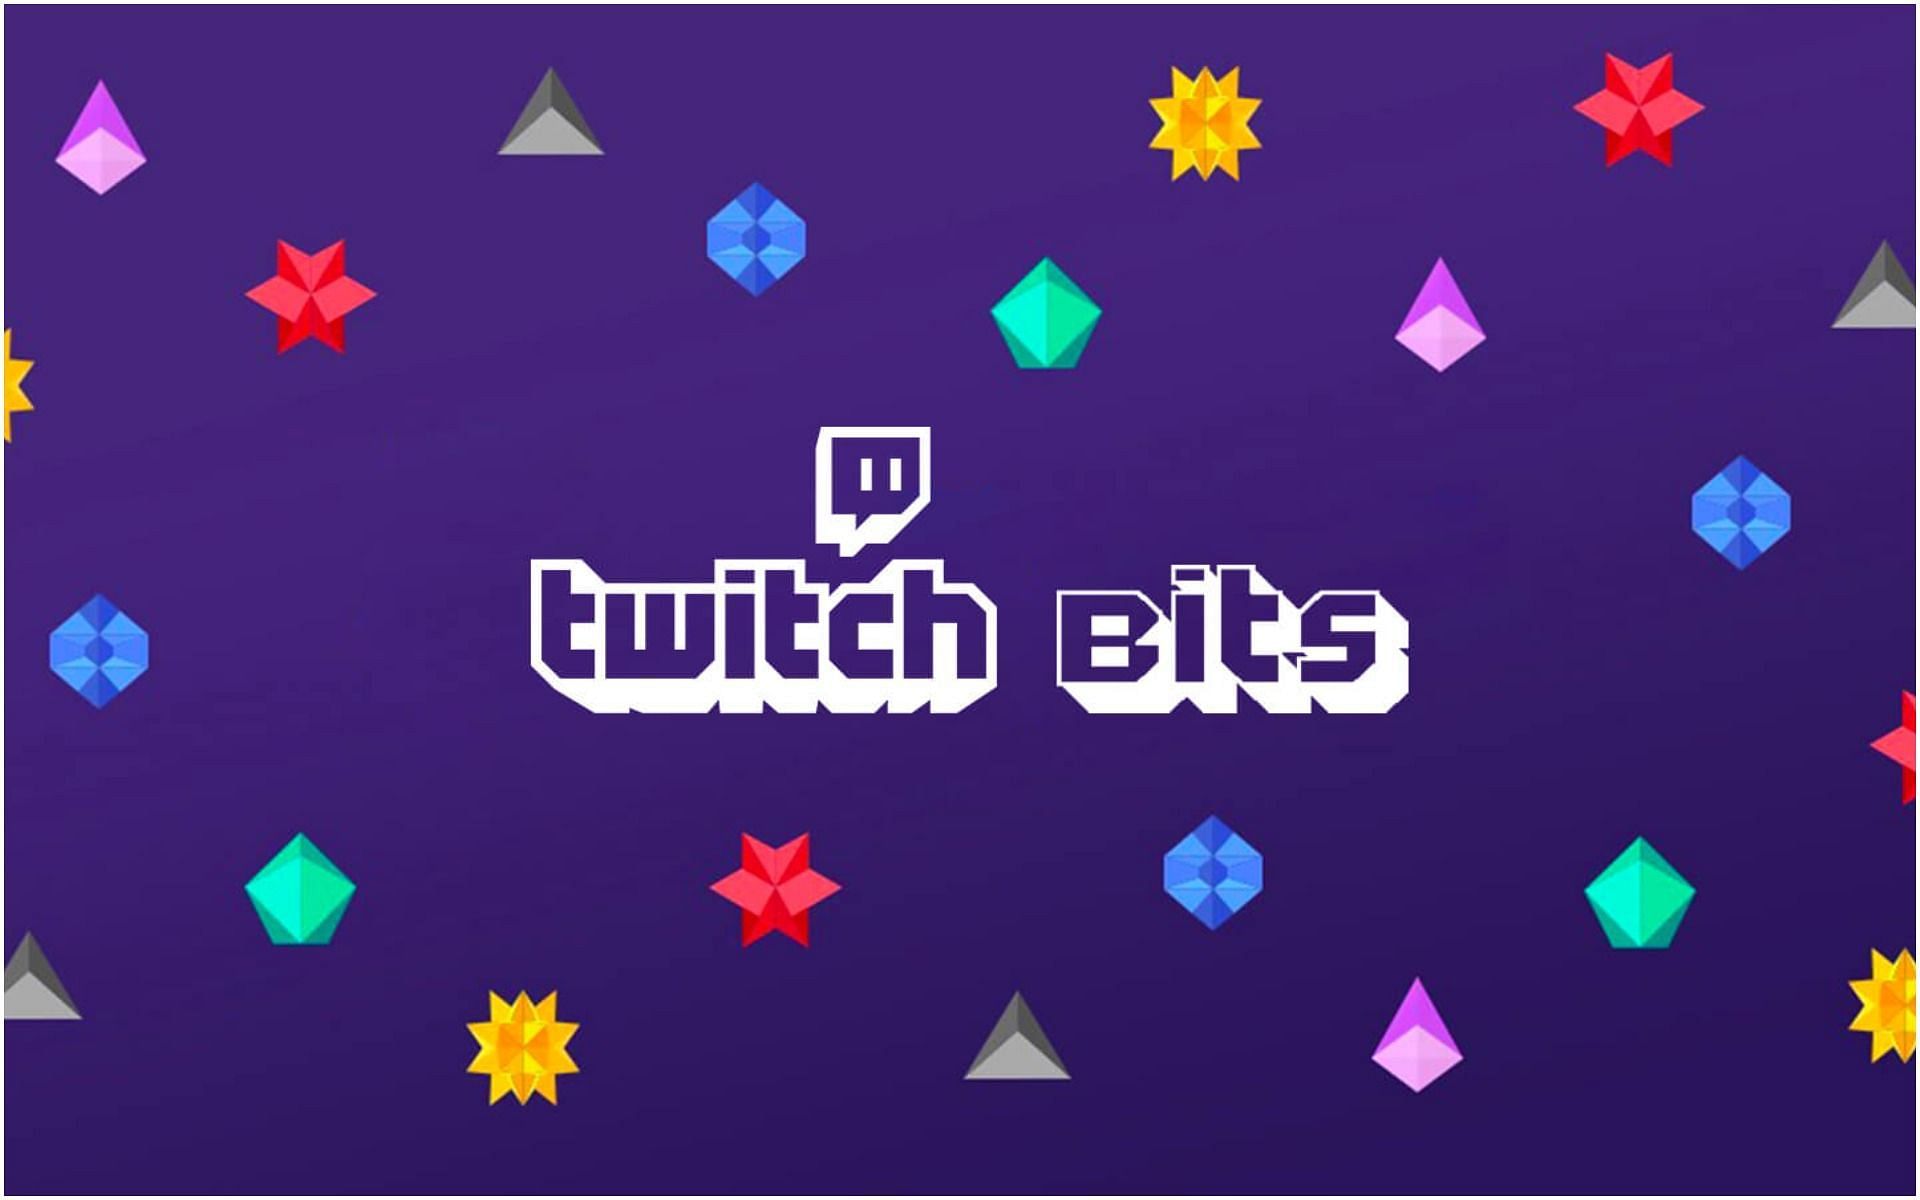 Twitch Bit scam comes into the spotlight, allegedly involving Turkish streamers (image via Twitch)